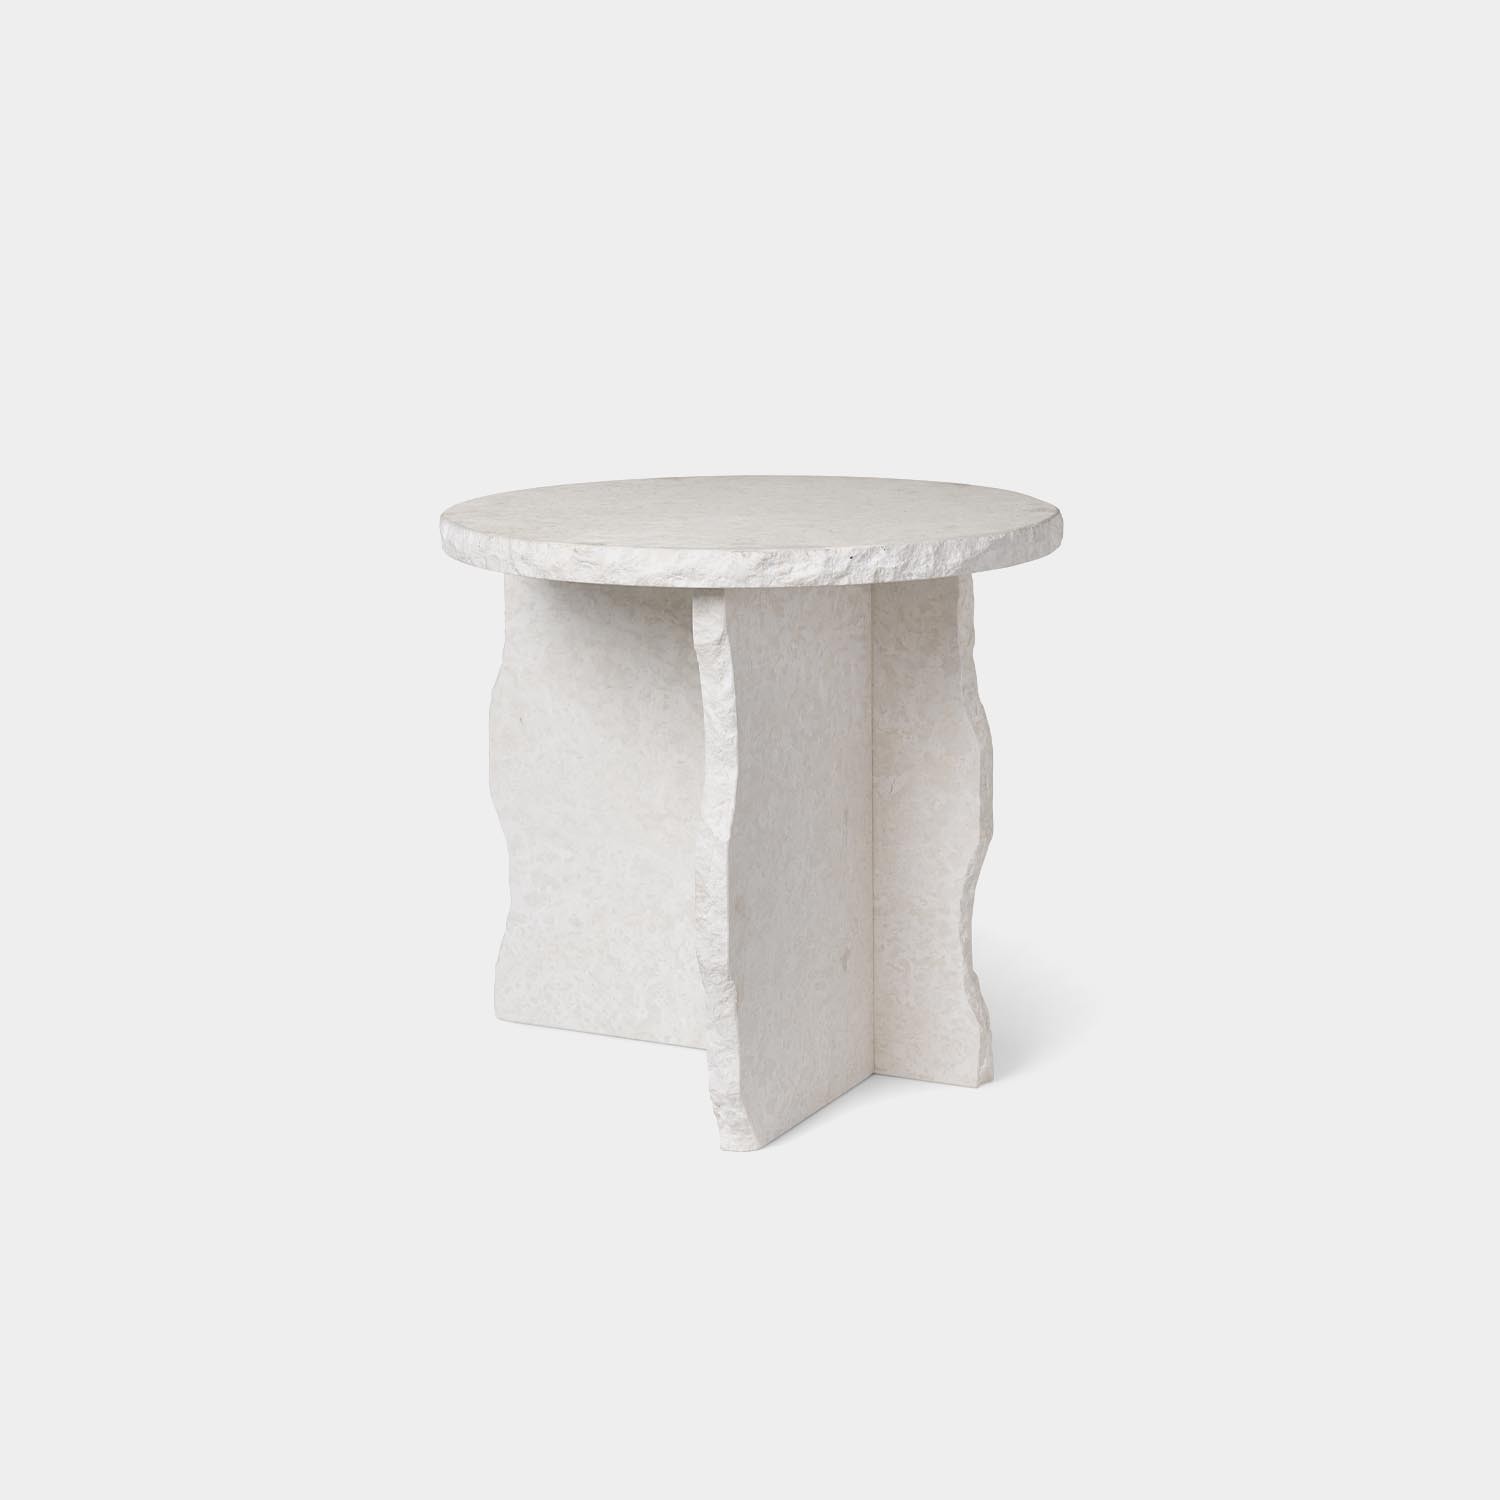 Mineral Sculptural Side Table, Bianco Curia Marble